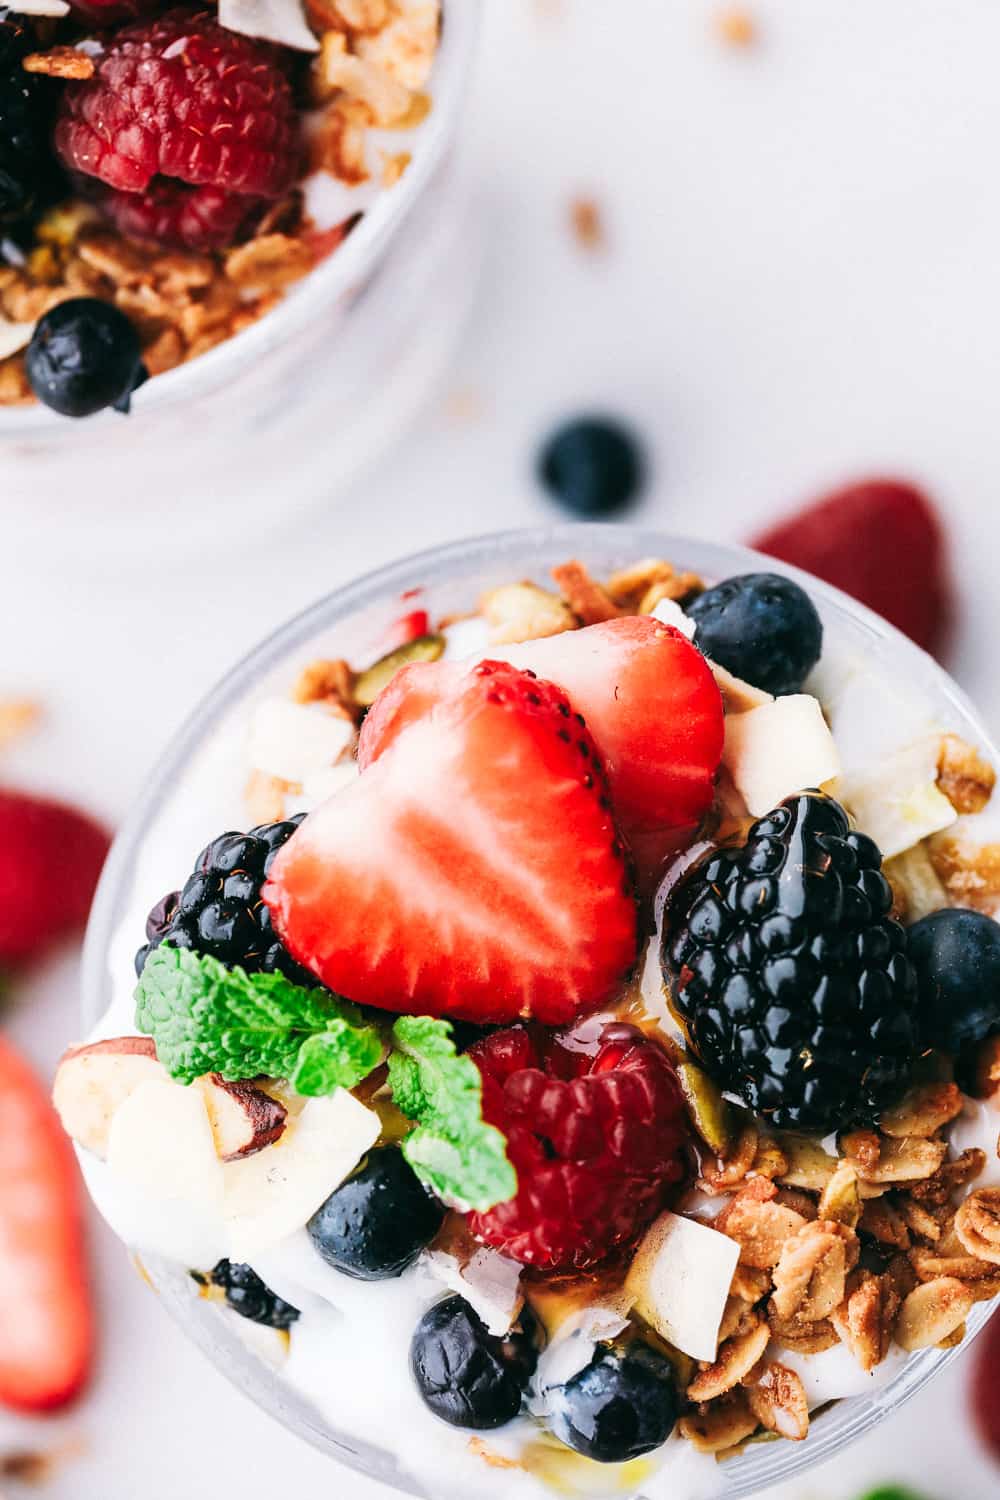 Yogurt parfait topped with fresh strawberries, blackberries, raspberries and blueberries with granola garnished on top.